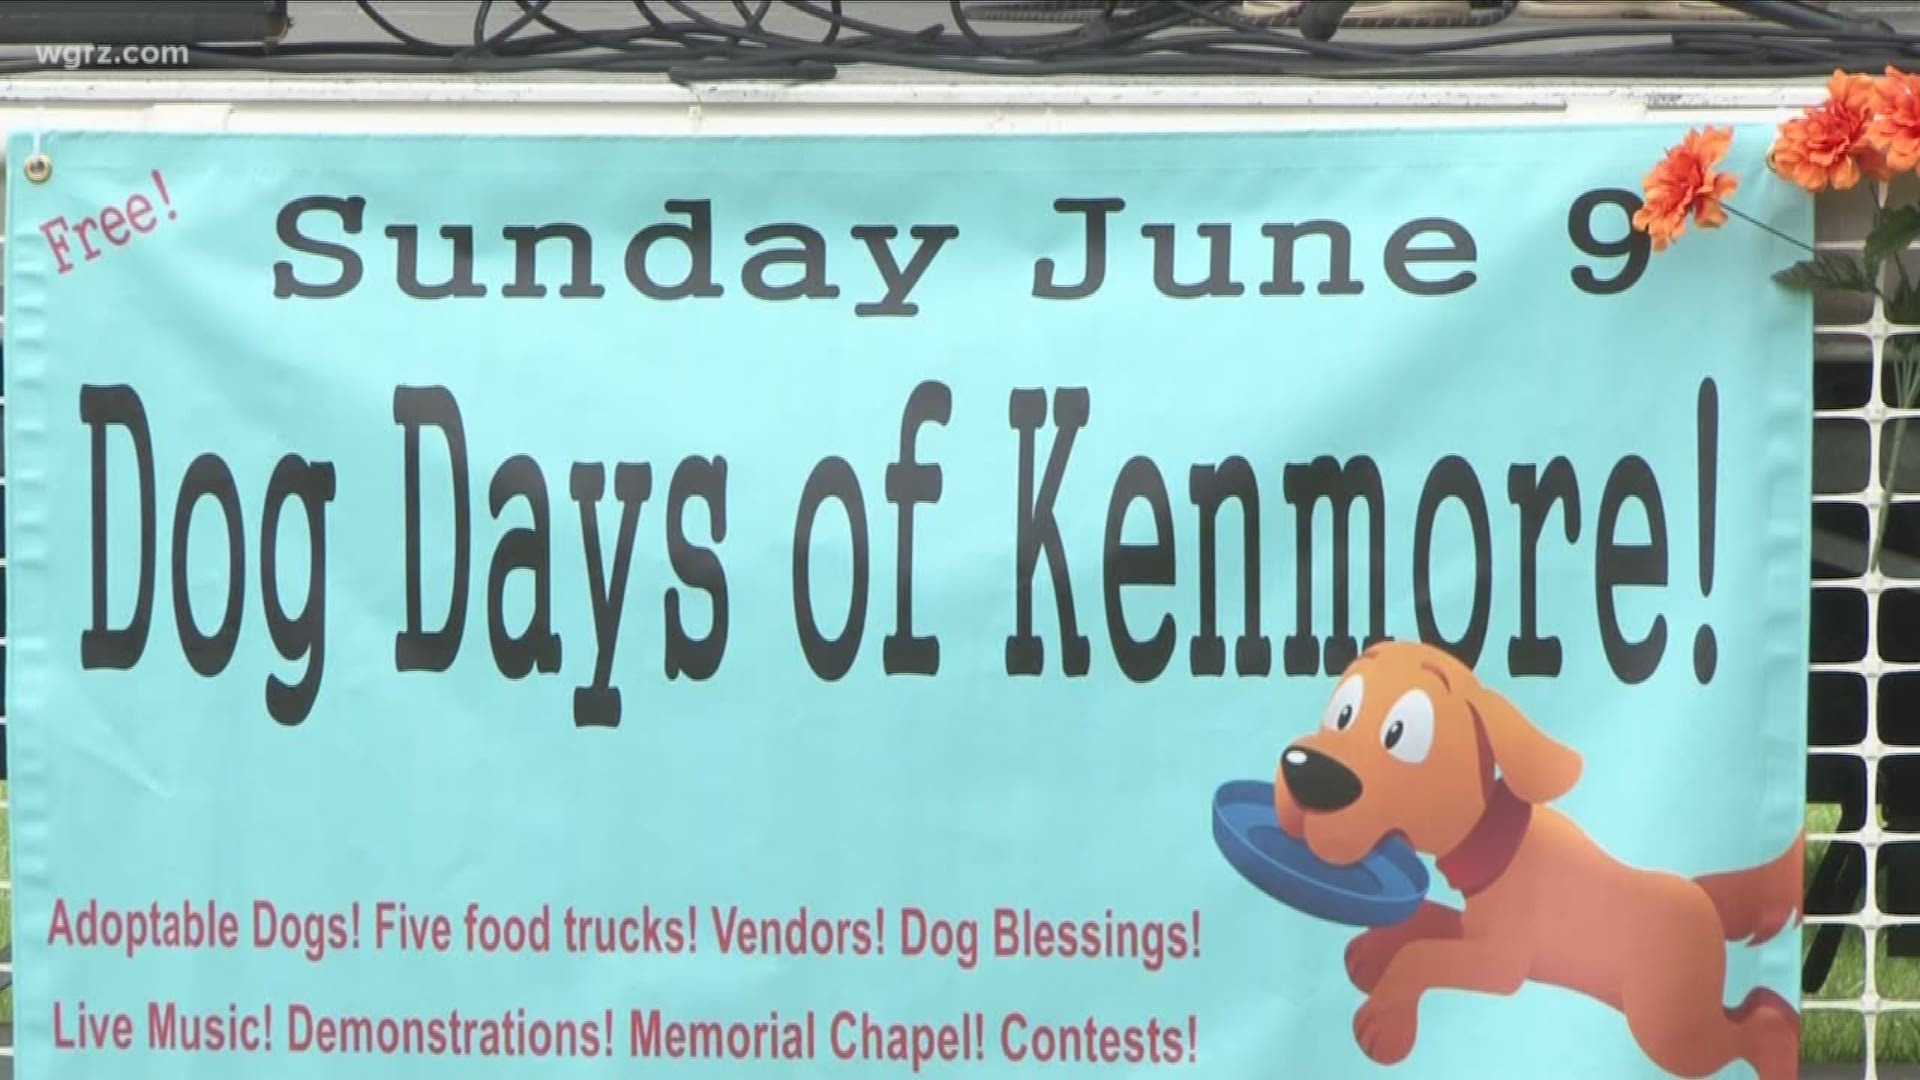 The dog days of Kenmore. The family-friendly, free event is for canines and they have dog sports contests. One contest is the person look alike duo.